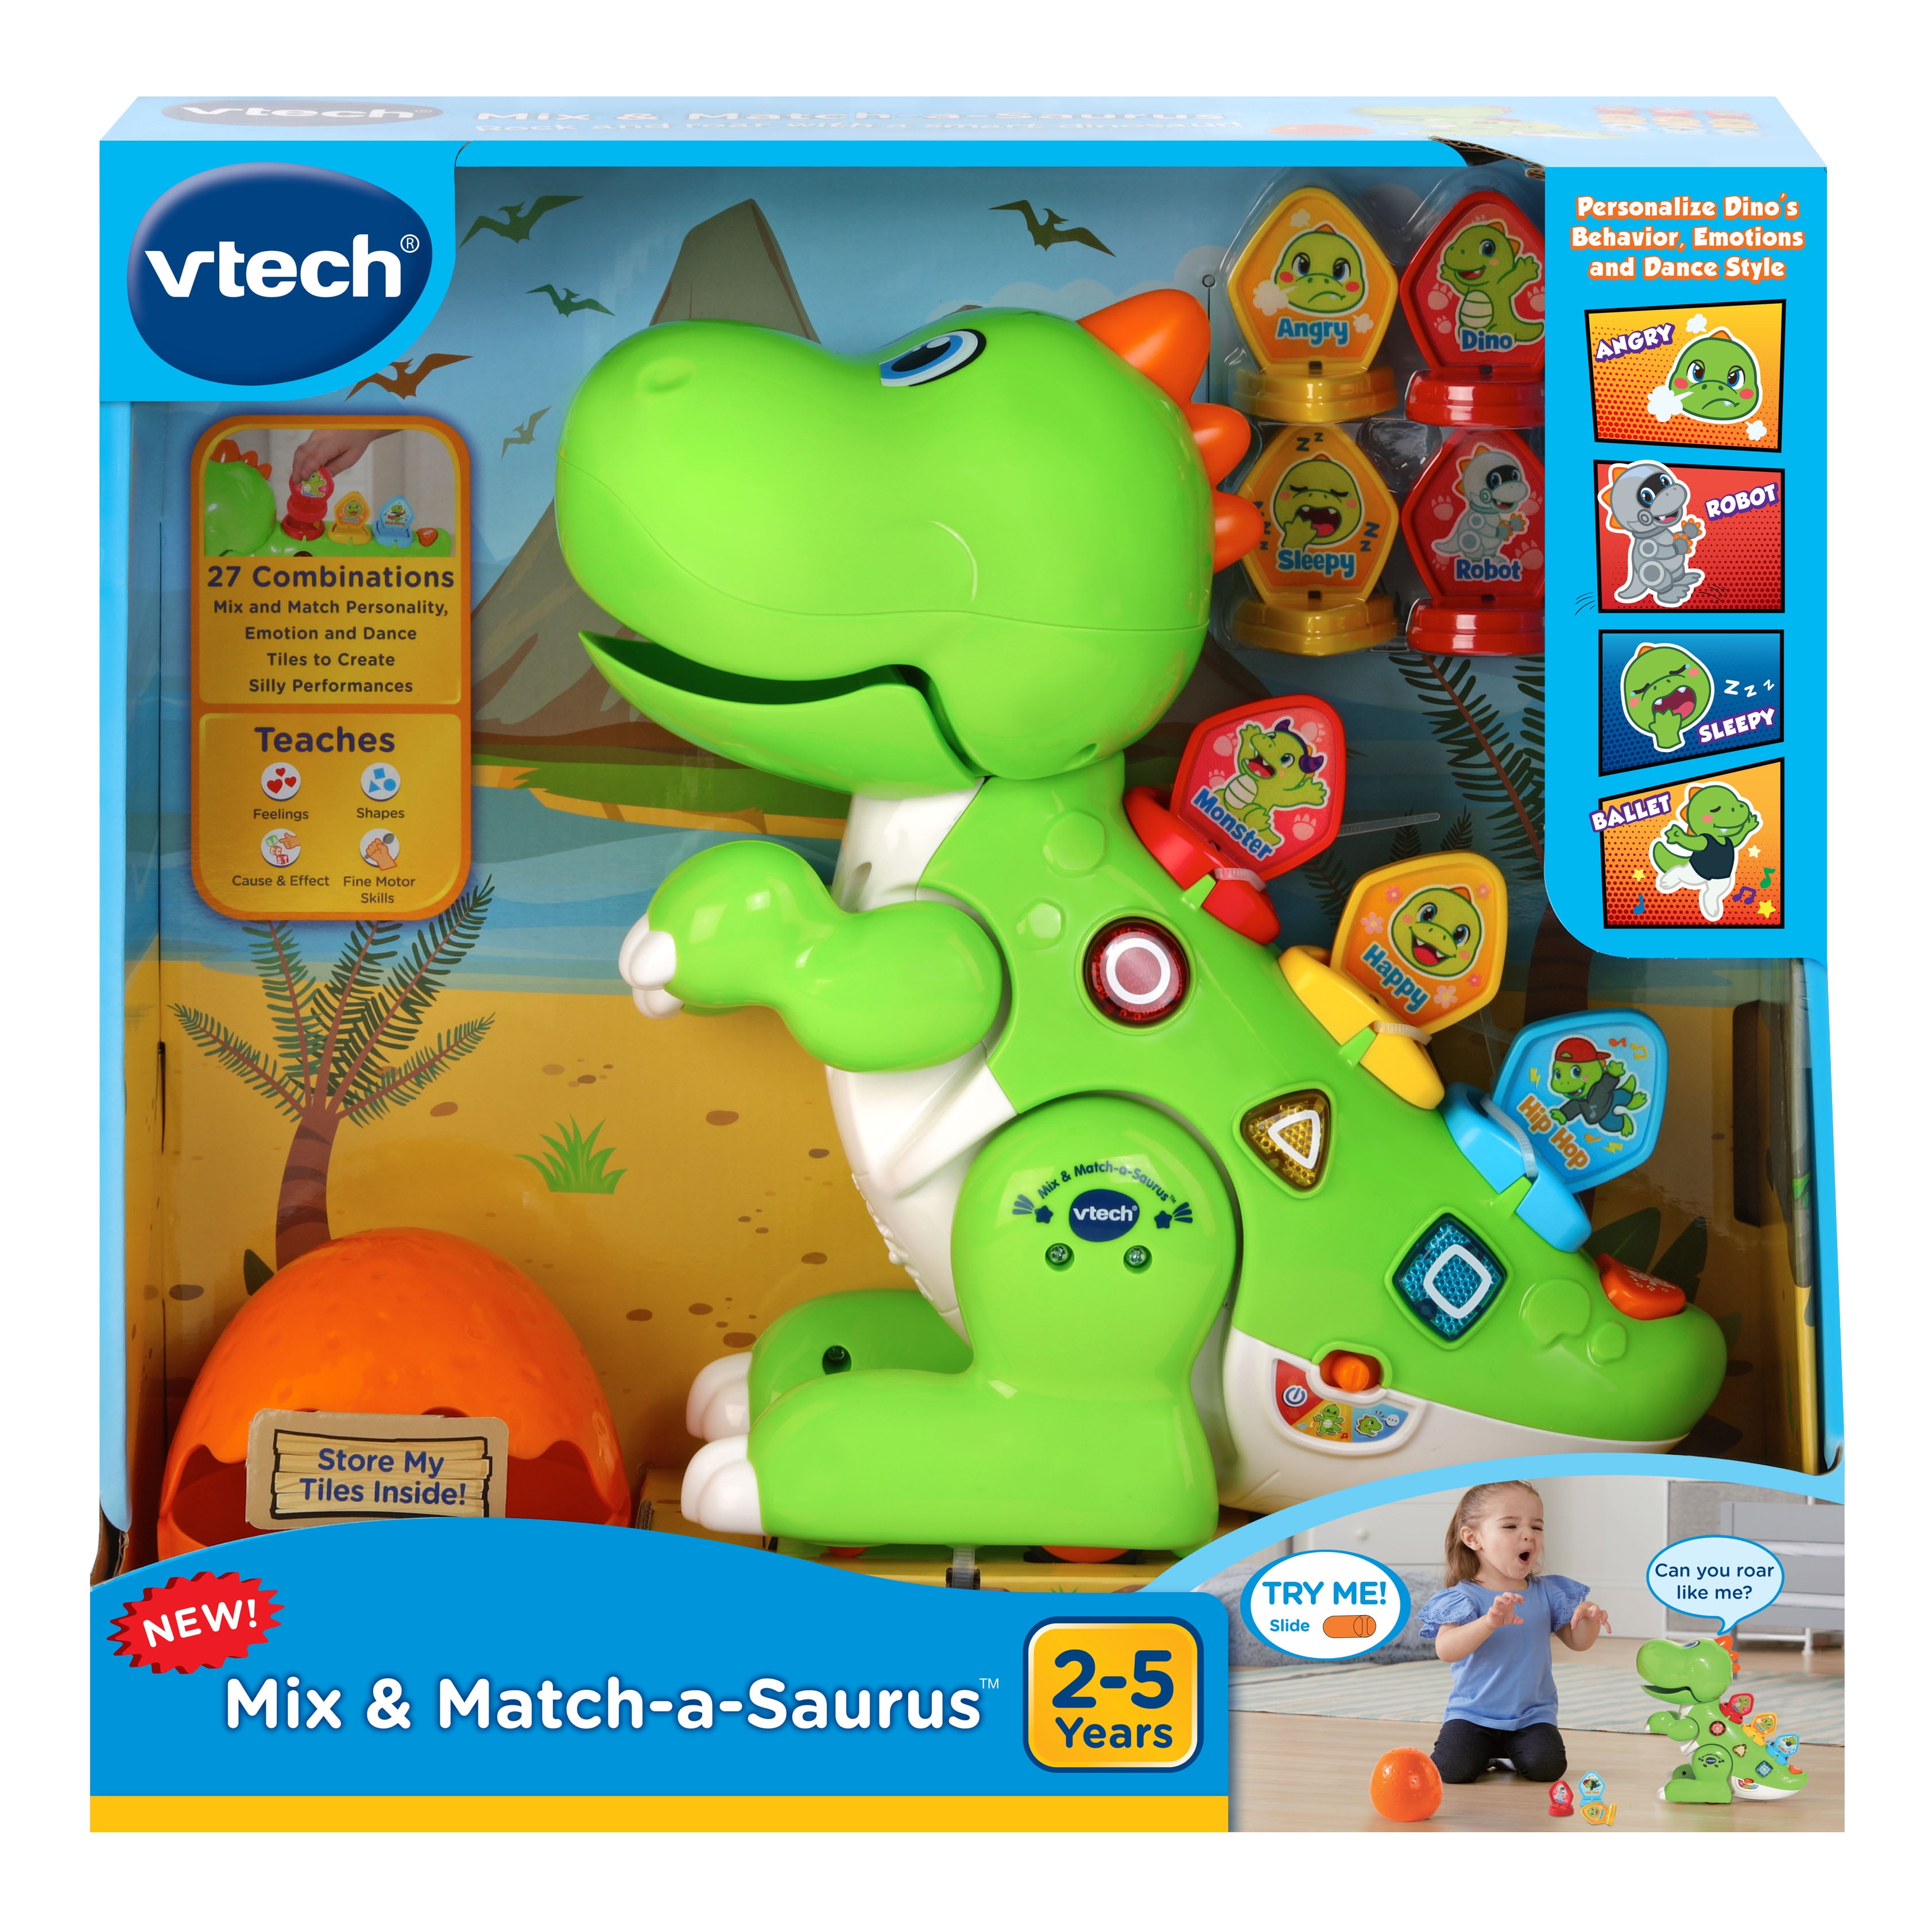 VTech Learn & Dance Dino Baby Interactive Educational Baby Musical Toy 2-5Yrs 